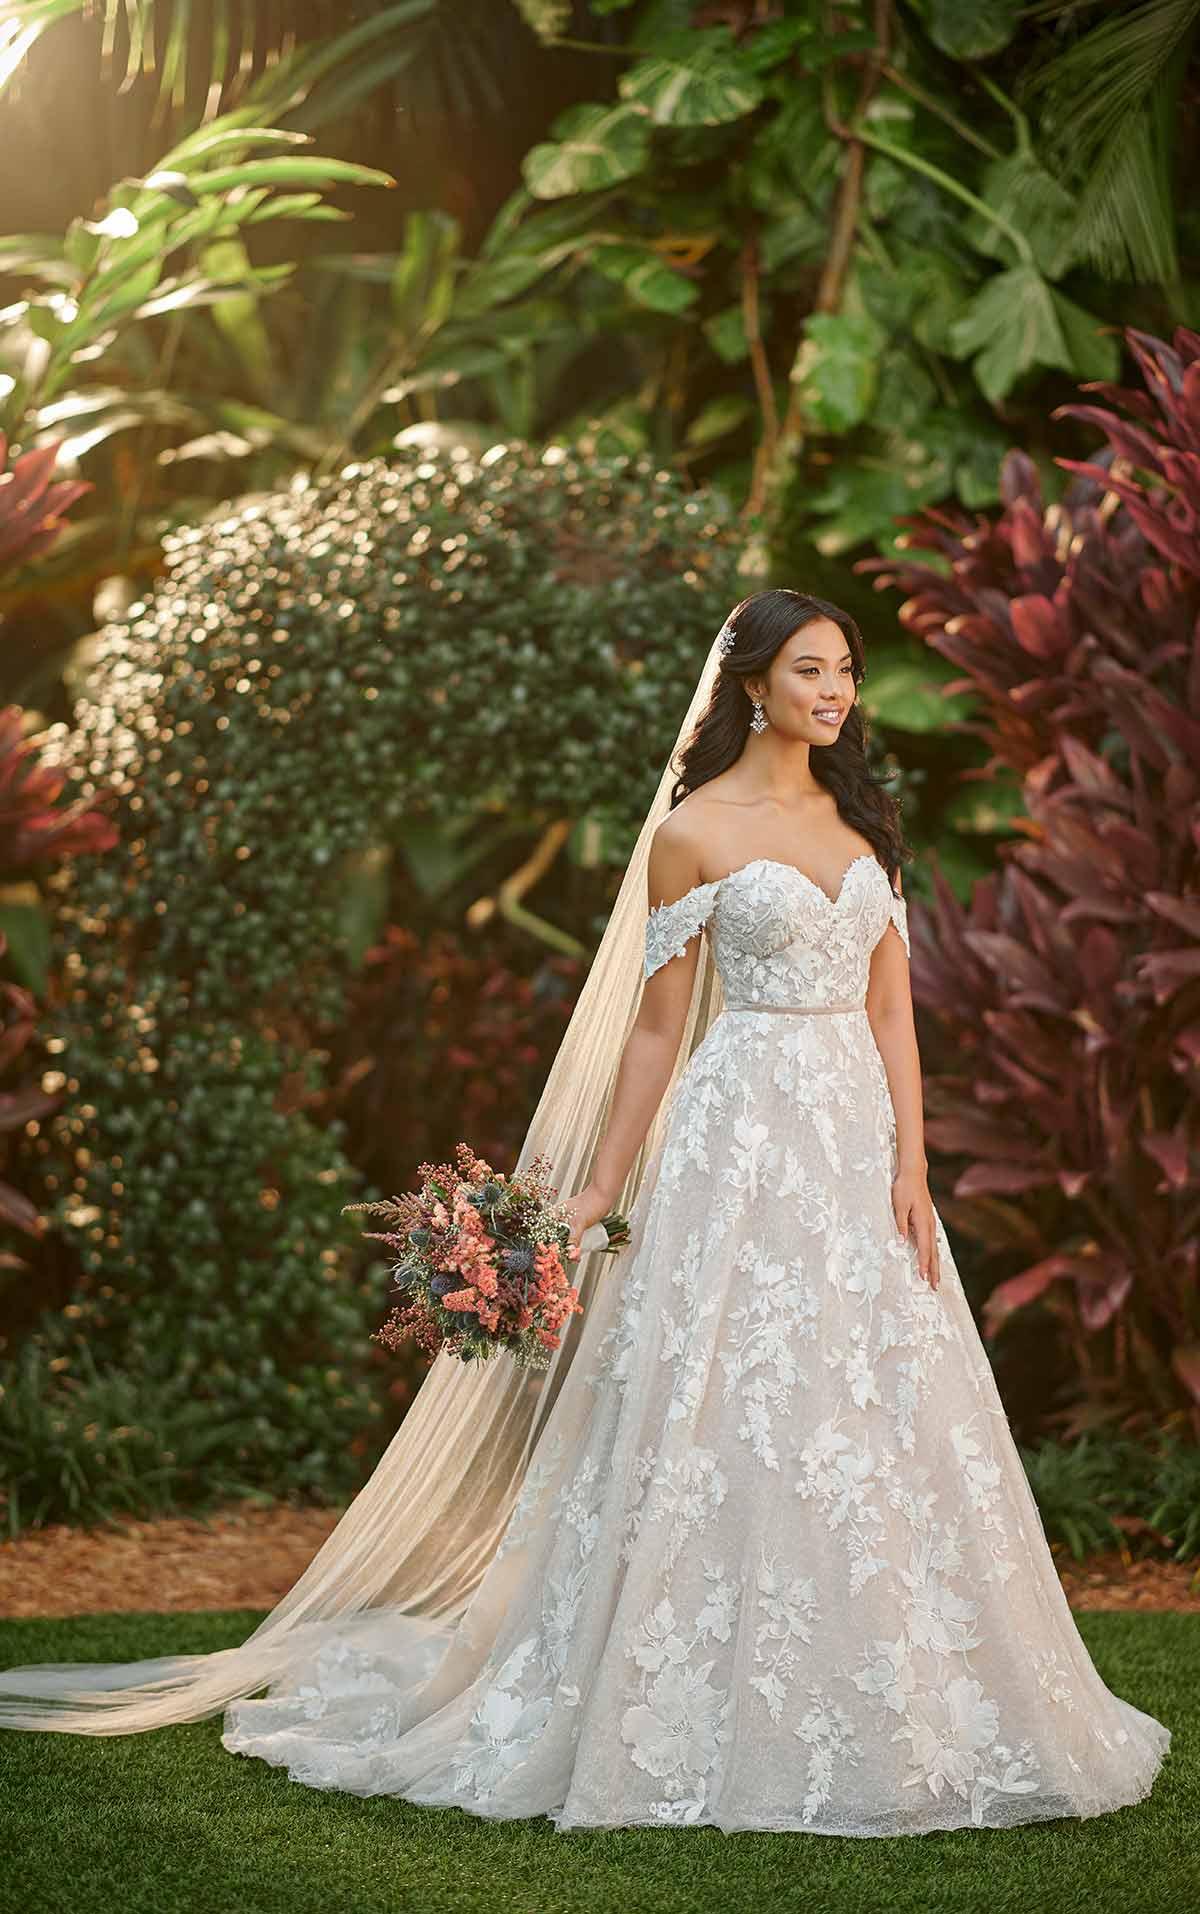 Alternative Wedding Dress Styles for Non-Traditional Brides